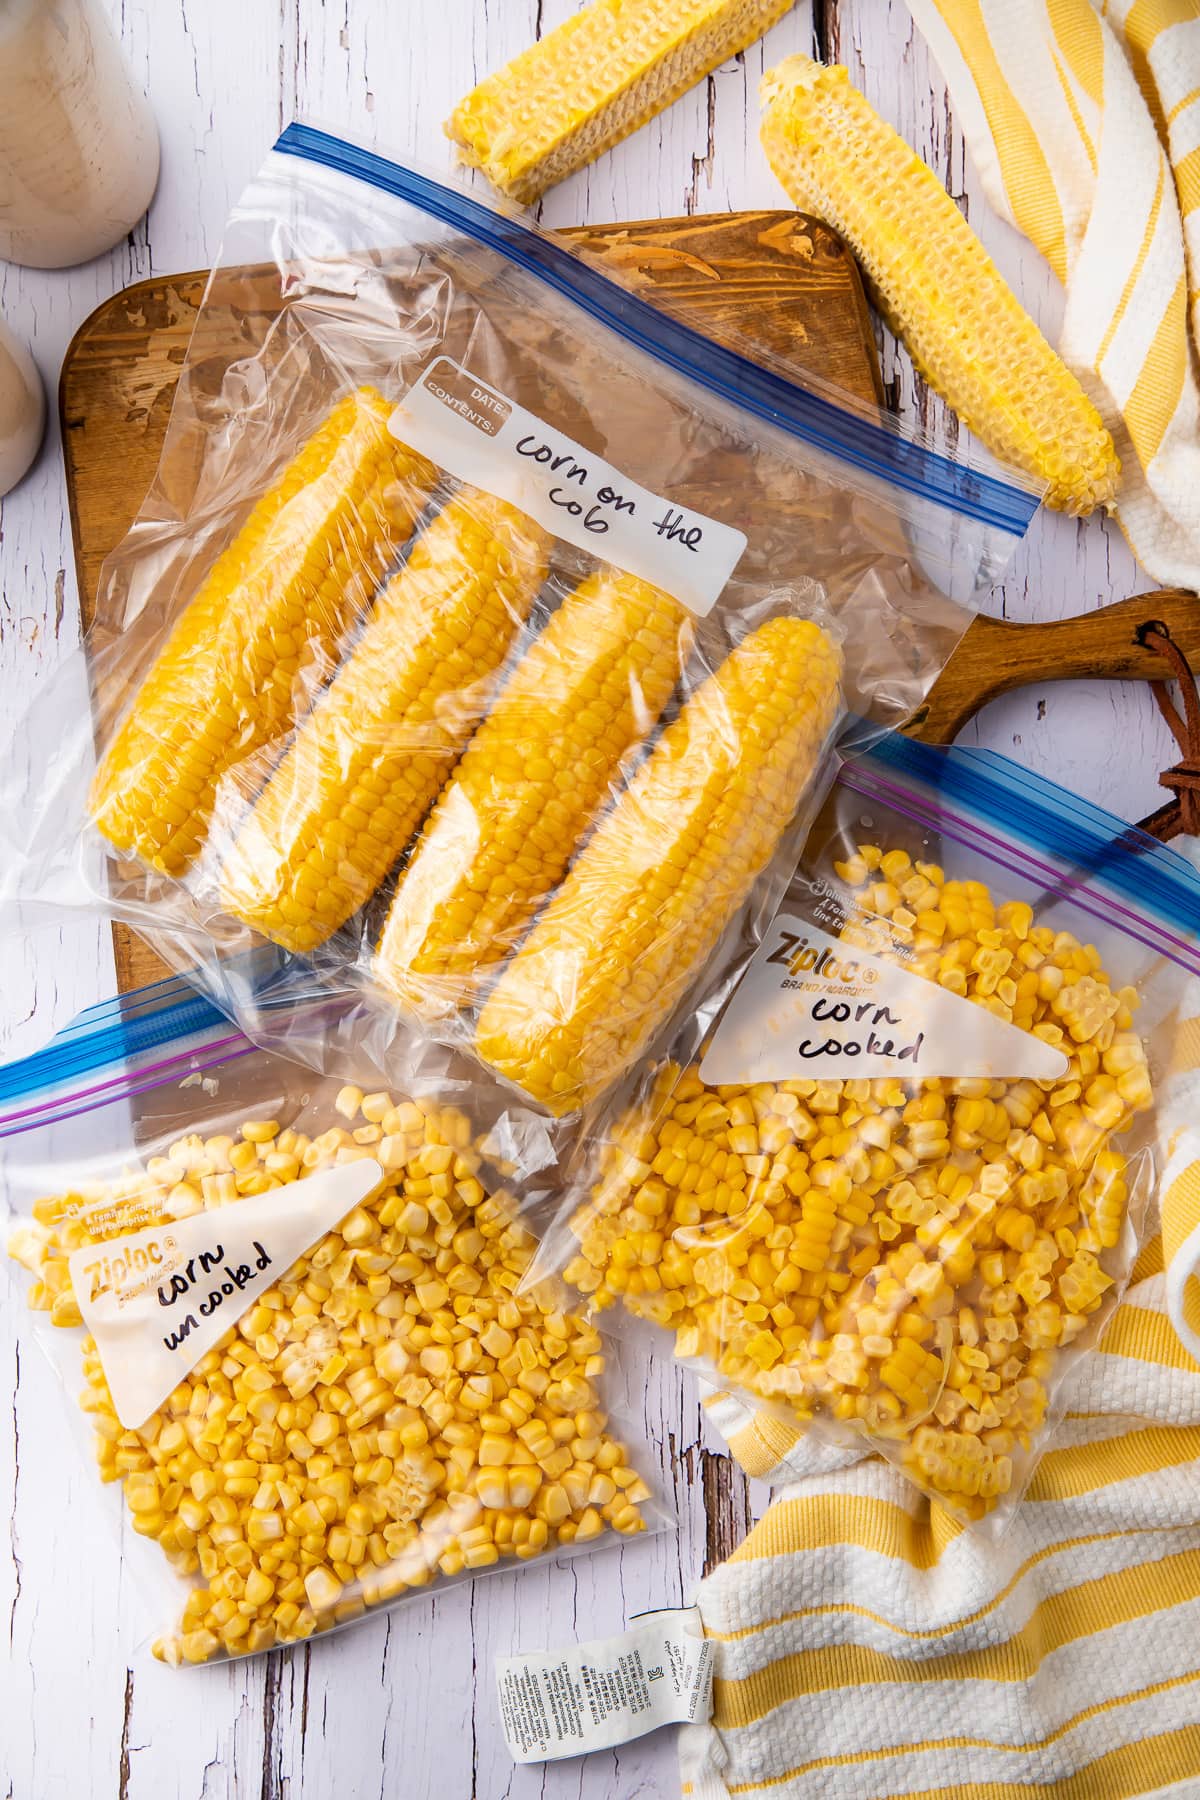 3 zippered bags of corn, ready to freeze for later.